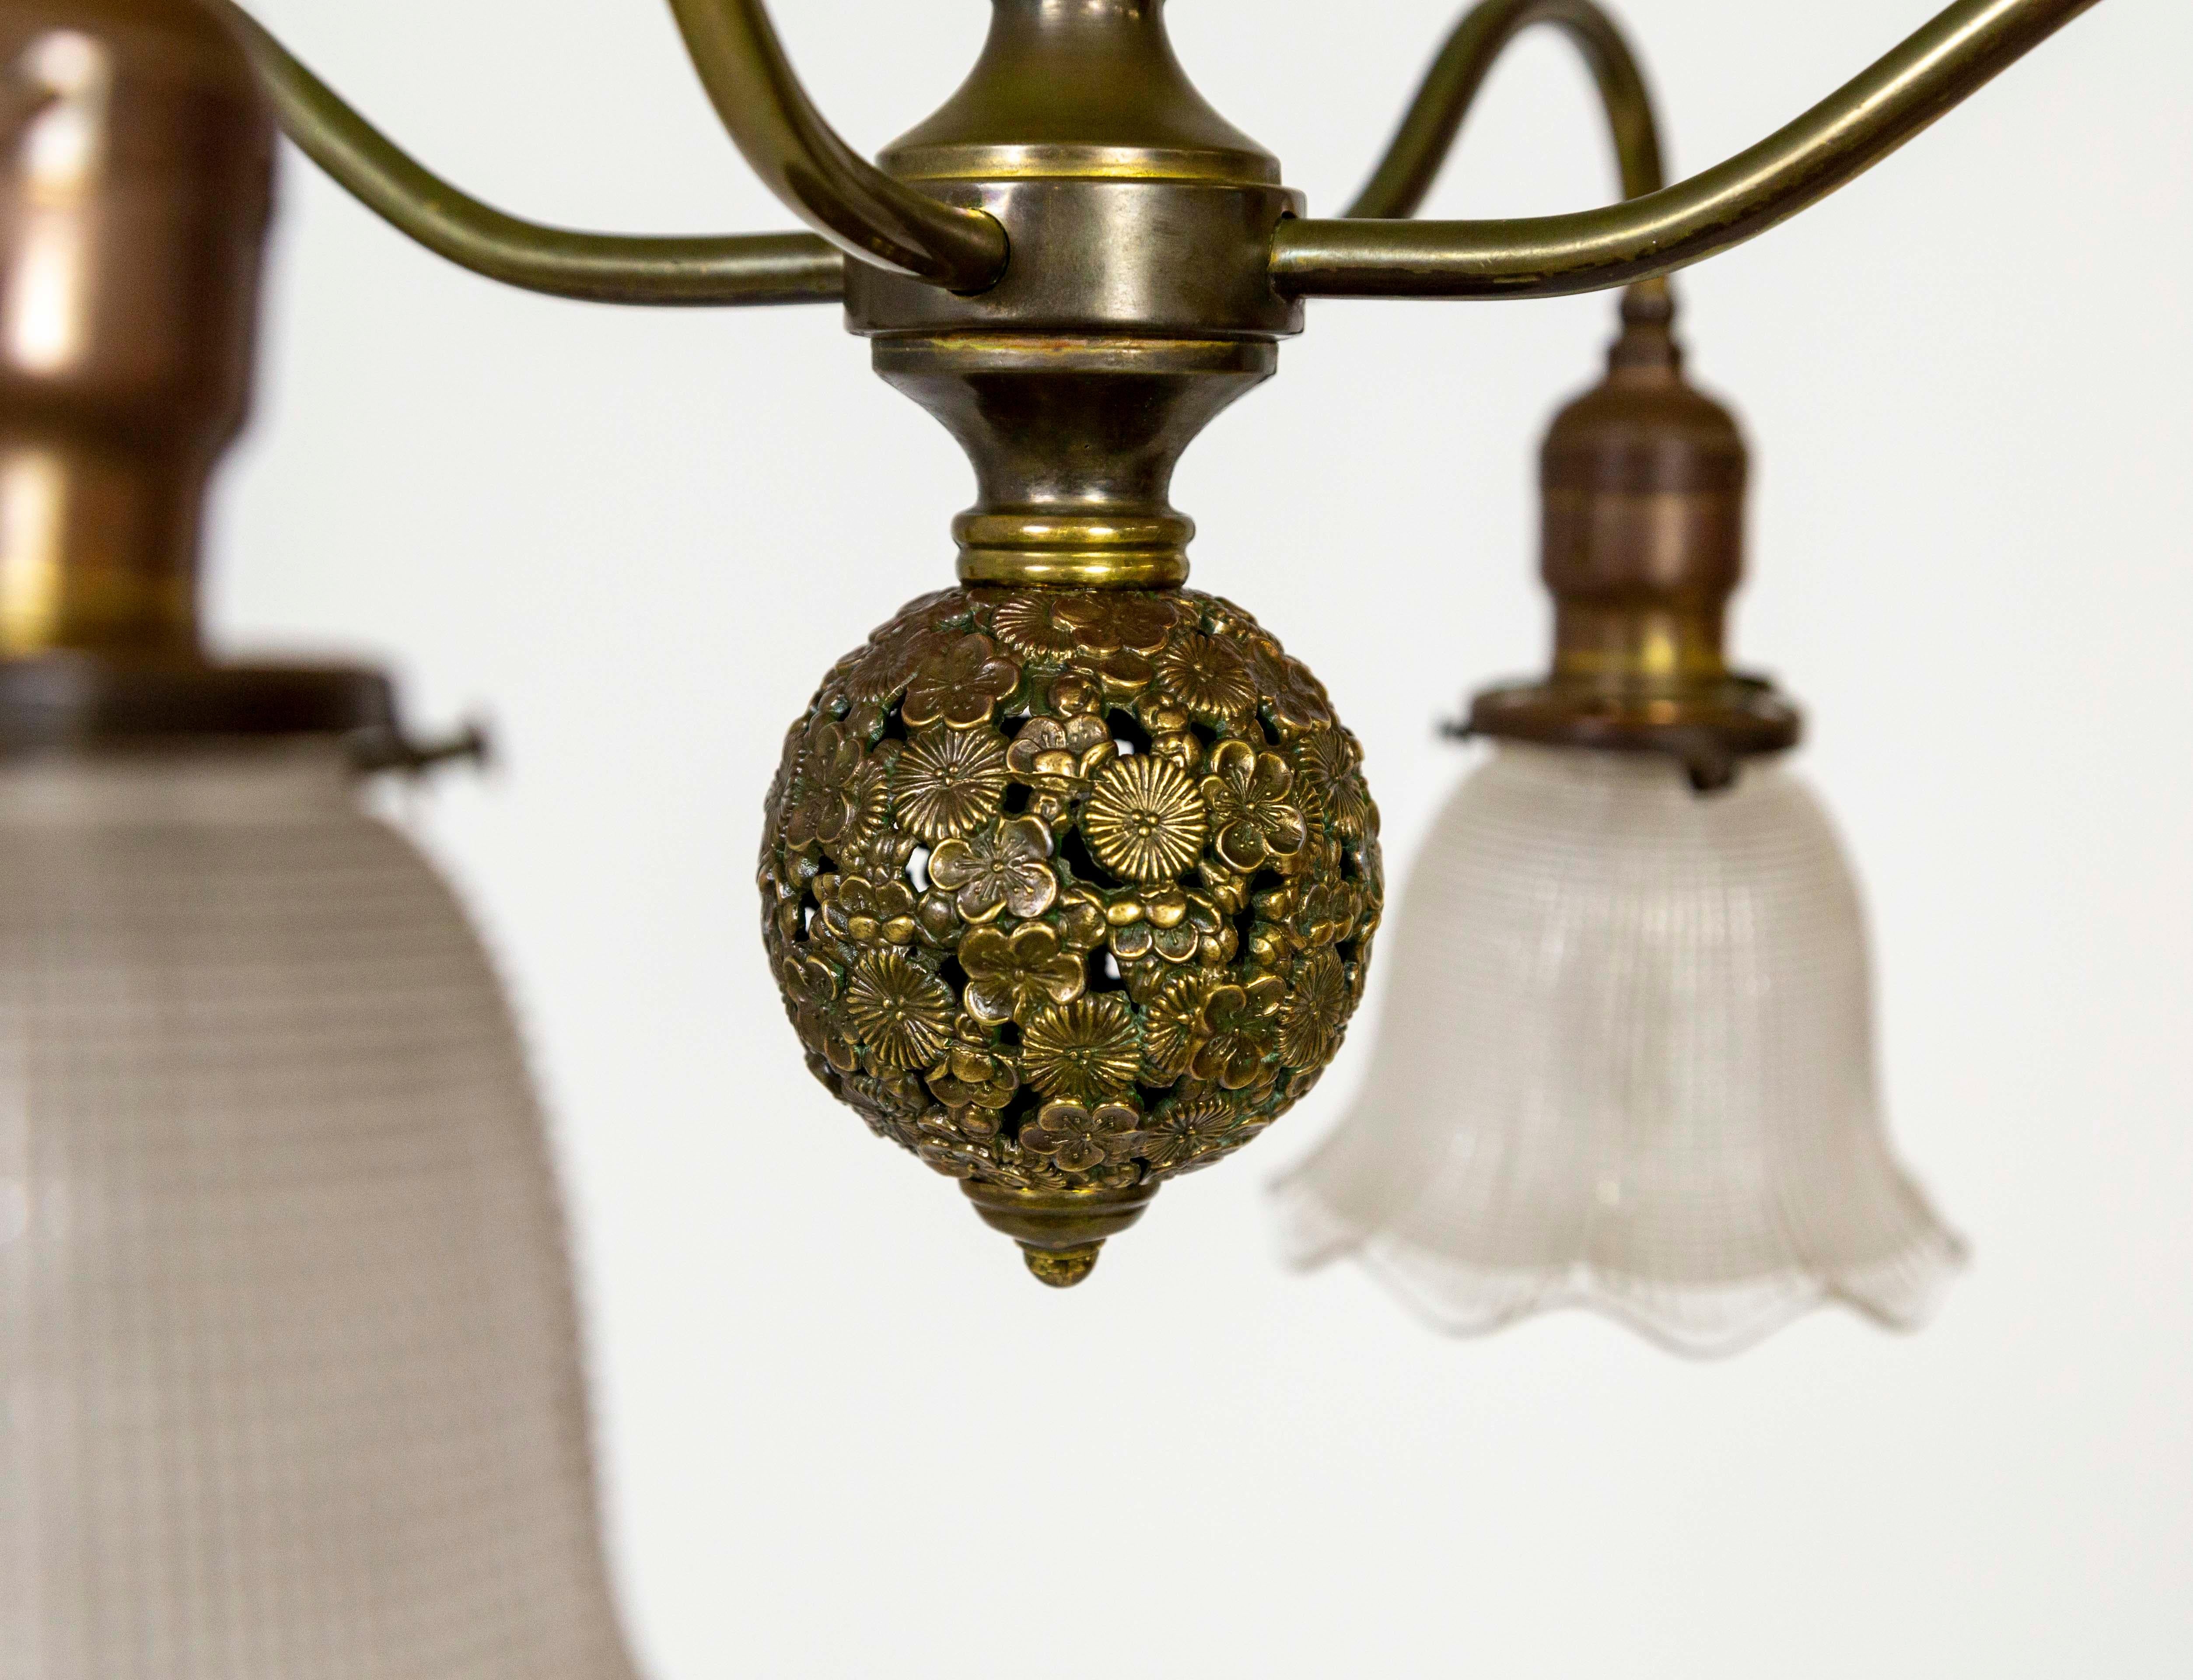 An Aesthetic, Victorian, 4-light chandelier with bellflower-shaped, holophane glass shades. The curving, brass arms extend from one of four decorative spheres off the stem. The bottom ball has a beautiful texture, it is composed of small cast